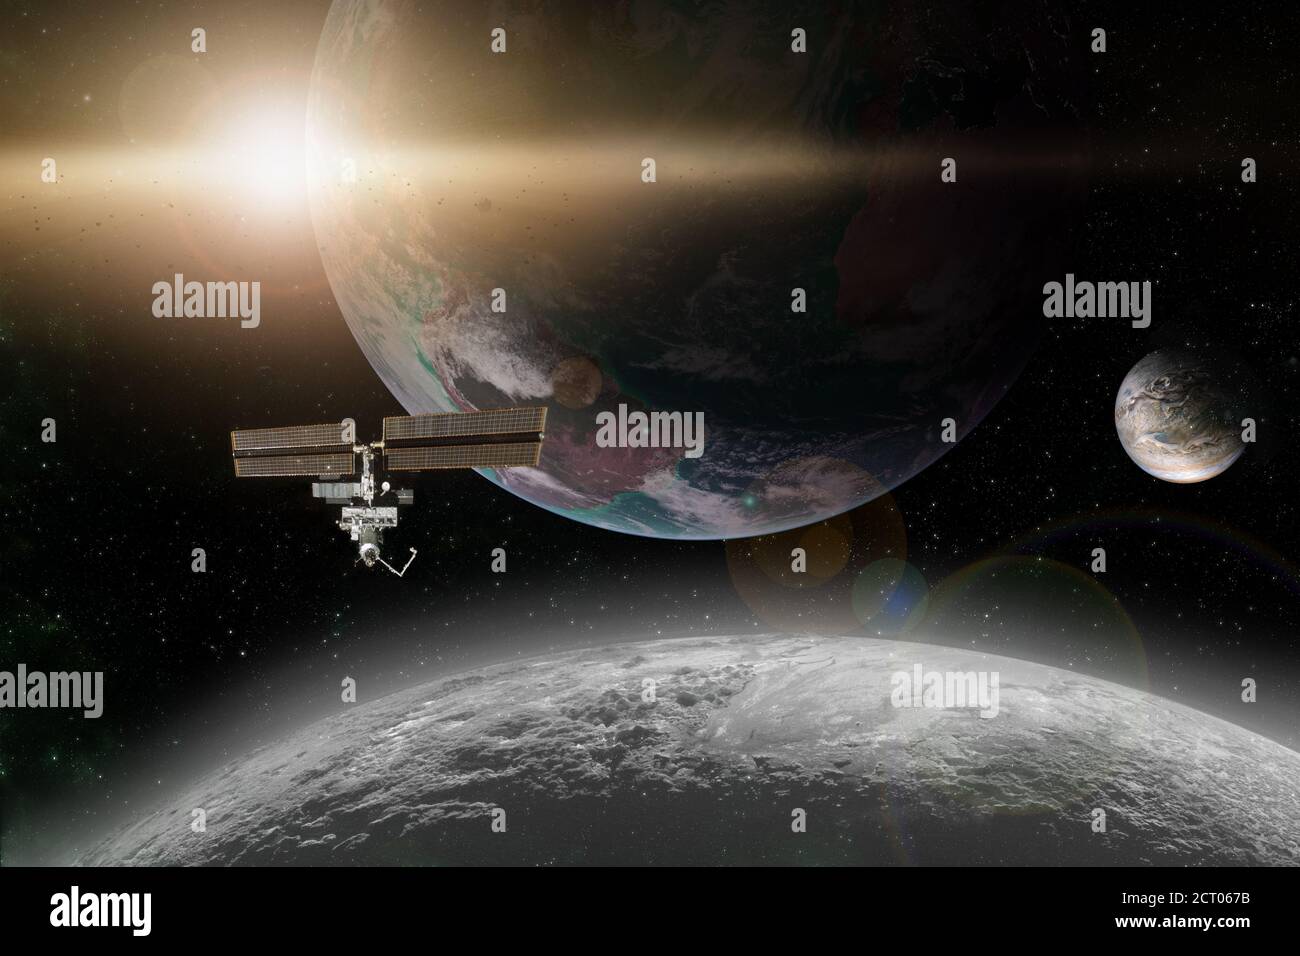 Iss exploration mission in the solar system Elements of this image furnished by NASA Stock Photo